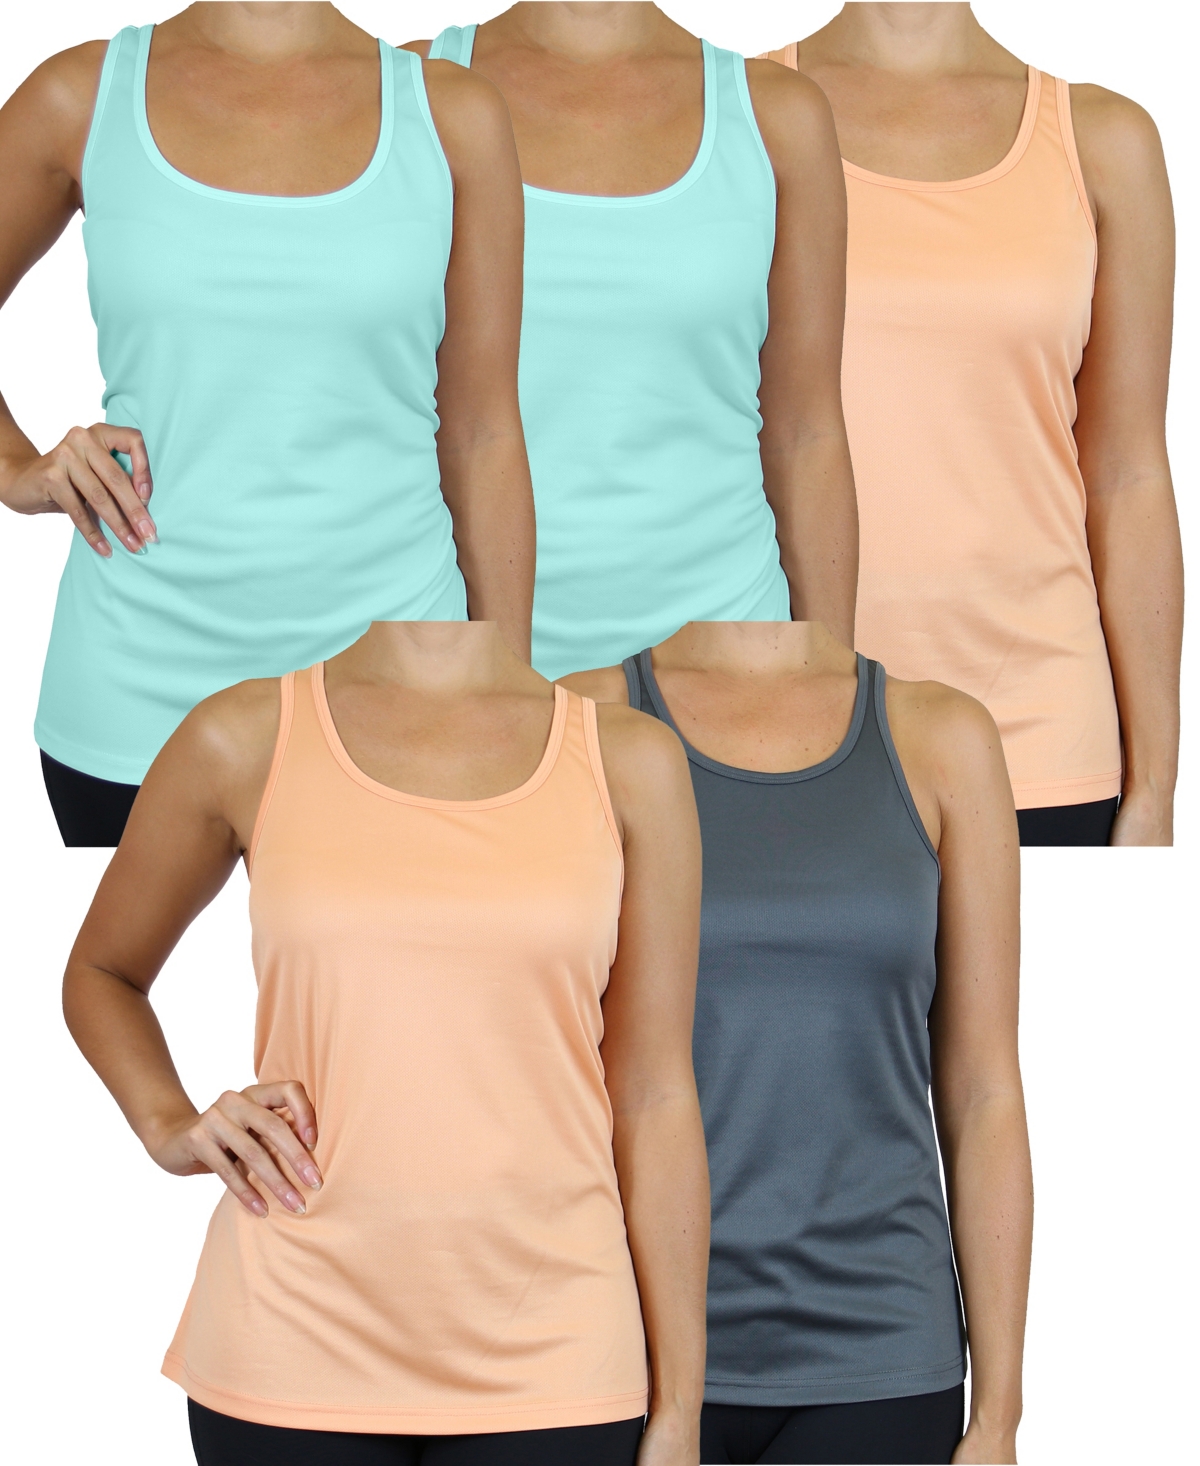 Galaxy By Harvic Women's Moisture Wicking Racerback Tanks-5 Pack In Mint,peach,charcoal